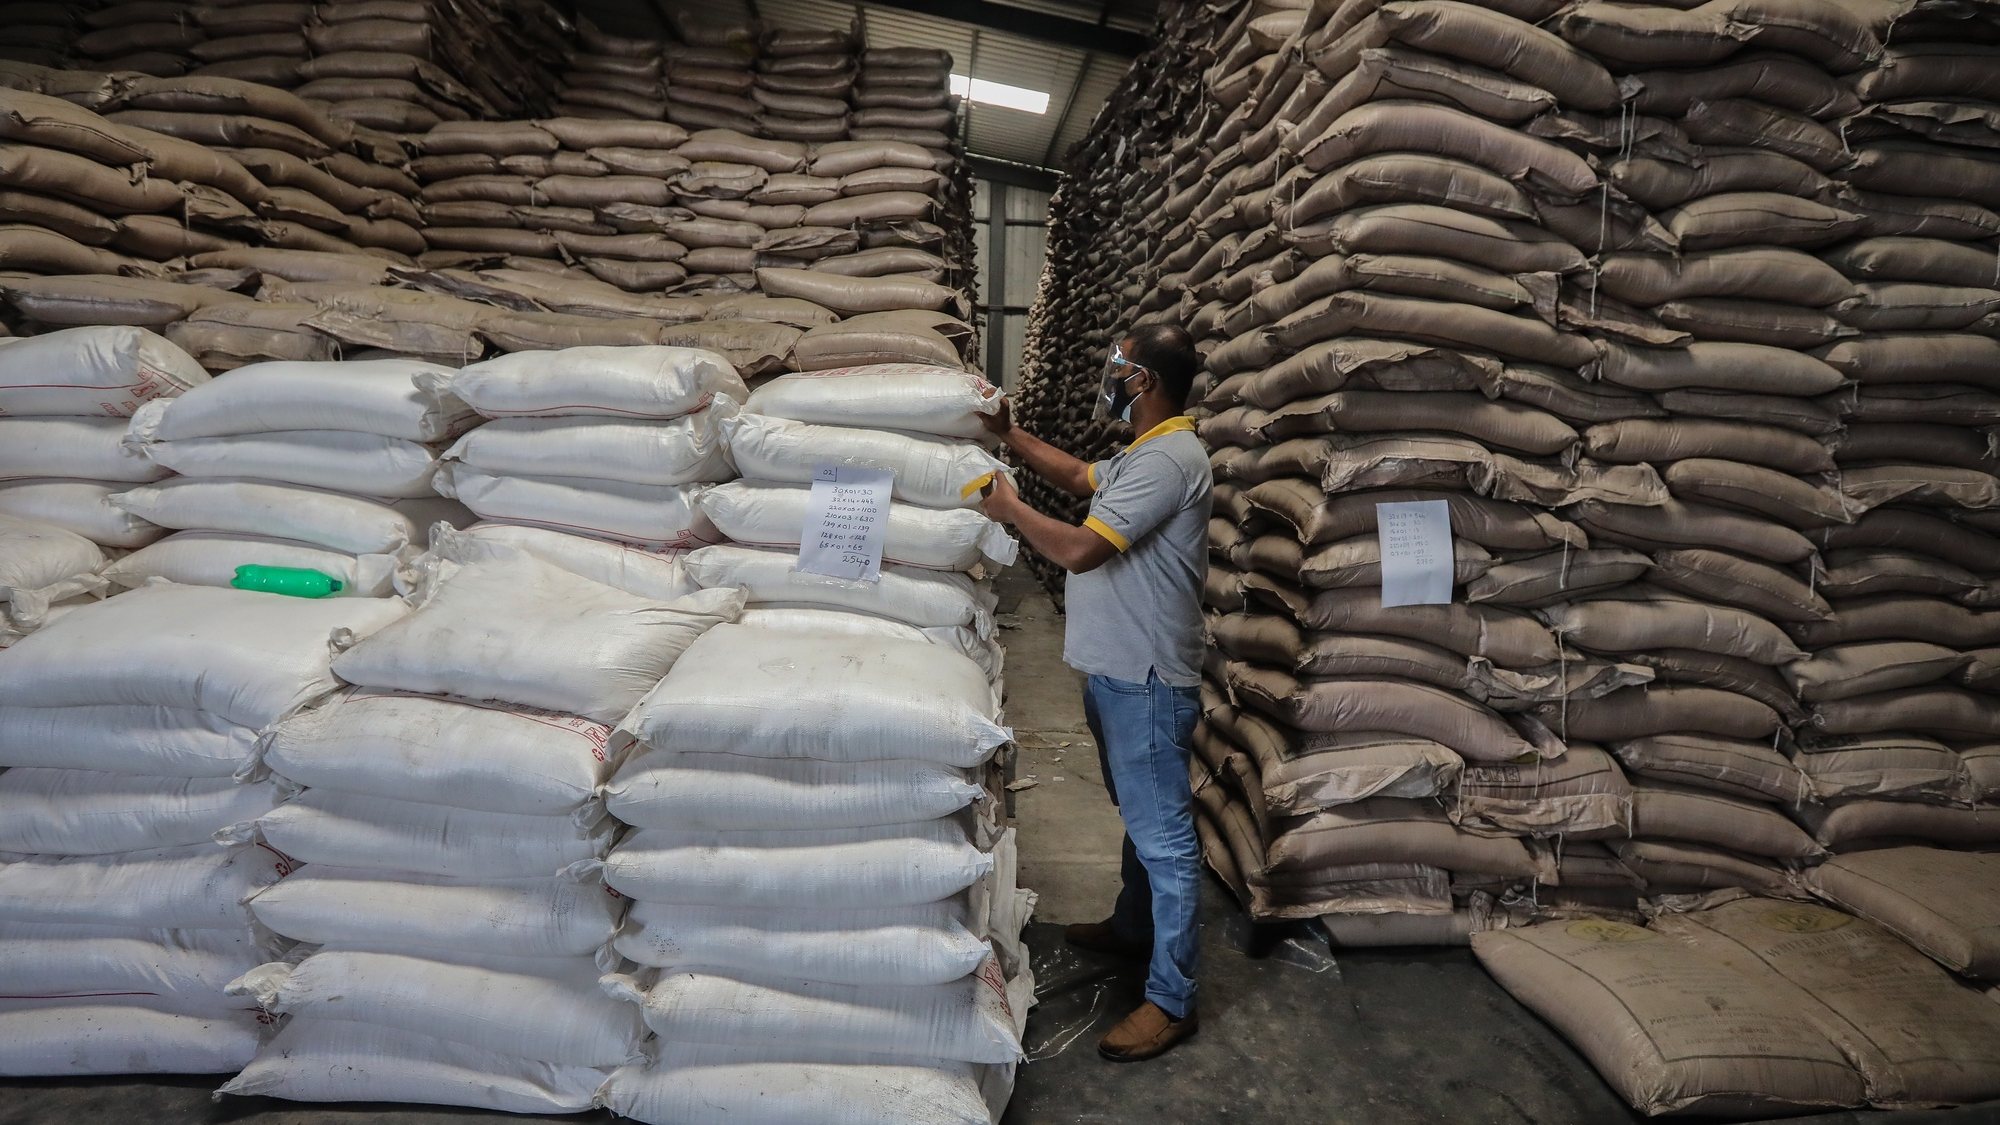 epa09469491 An official from Sri Lankaâ€™s Consumer Affairs Authority (CAA) inspects a large stock of sugar at a warehouse in Colombo, Sri Lanka, 13 September 2021 (issued 15 September 2021). With the onset of the Covid-19 pandemic and economic crisis, there was a shortage of essential food items emerged throughout the country creating ques at some retail shops. The Sri Lankan government imposed emergency regulations under the Public Security Ordinance on 30 August to curtail skyrocketing of essential food items by hoarding and artificial shortages. Meanwhile, Islandâ€™s Consumer Affairs Authority launched raids on black market retailers and acquired some food stocks by traders and food importers.  EPA/CHAMILA KARUNARATHNE